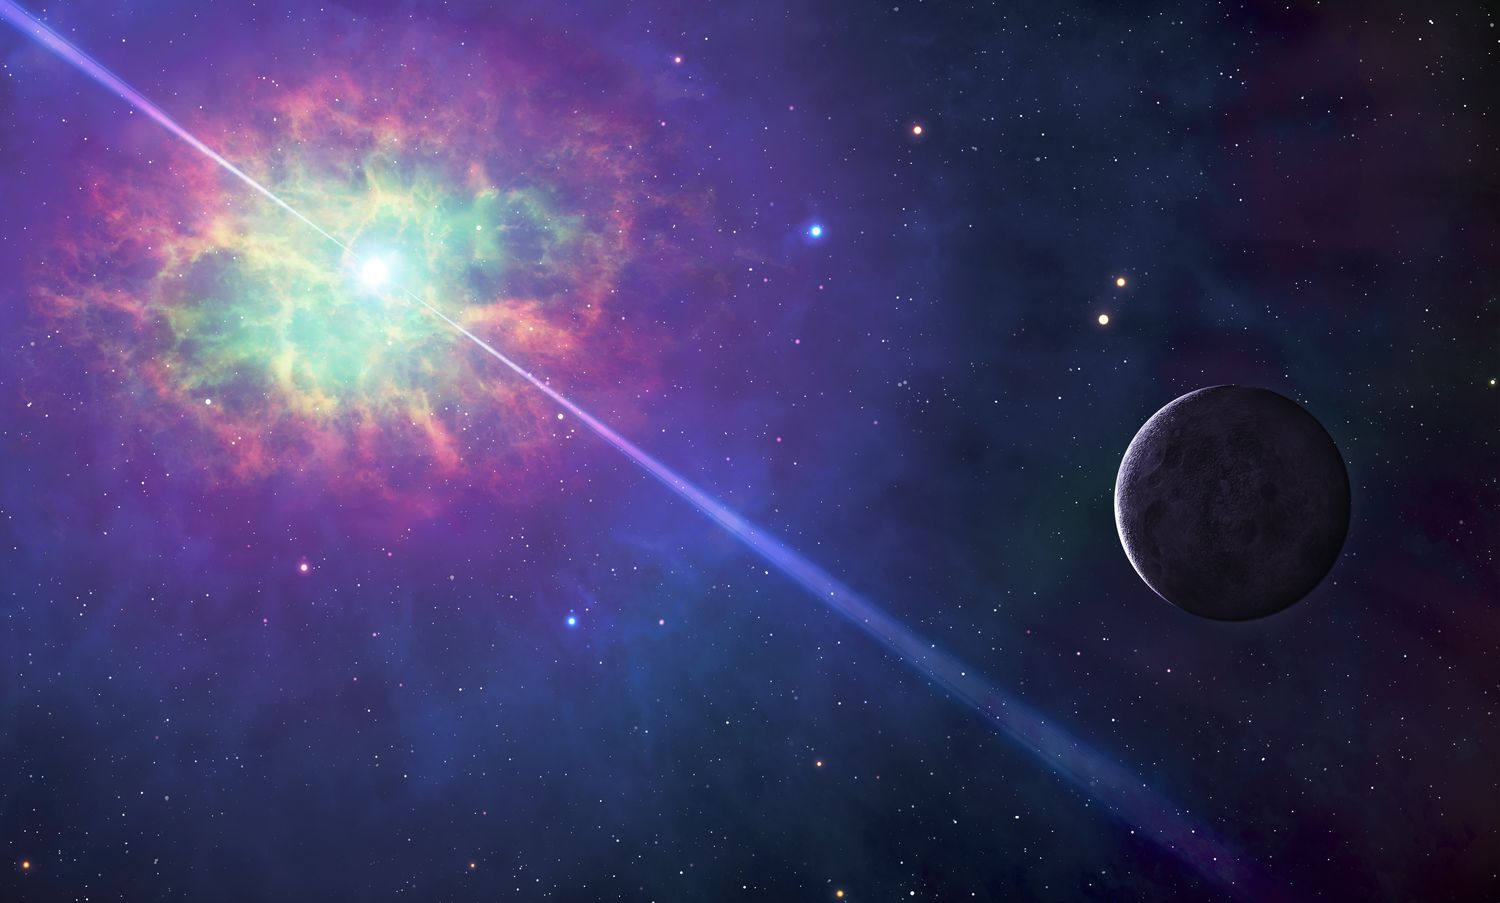 Image of space, with a colorful cloud surrounding a star that projects beams of light in two directions, with a planet illuminated nearby.